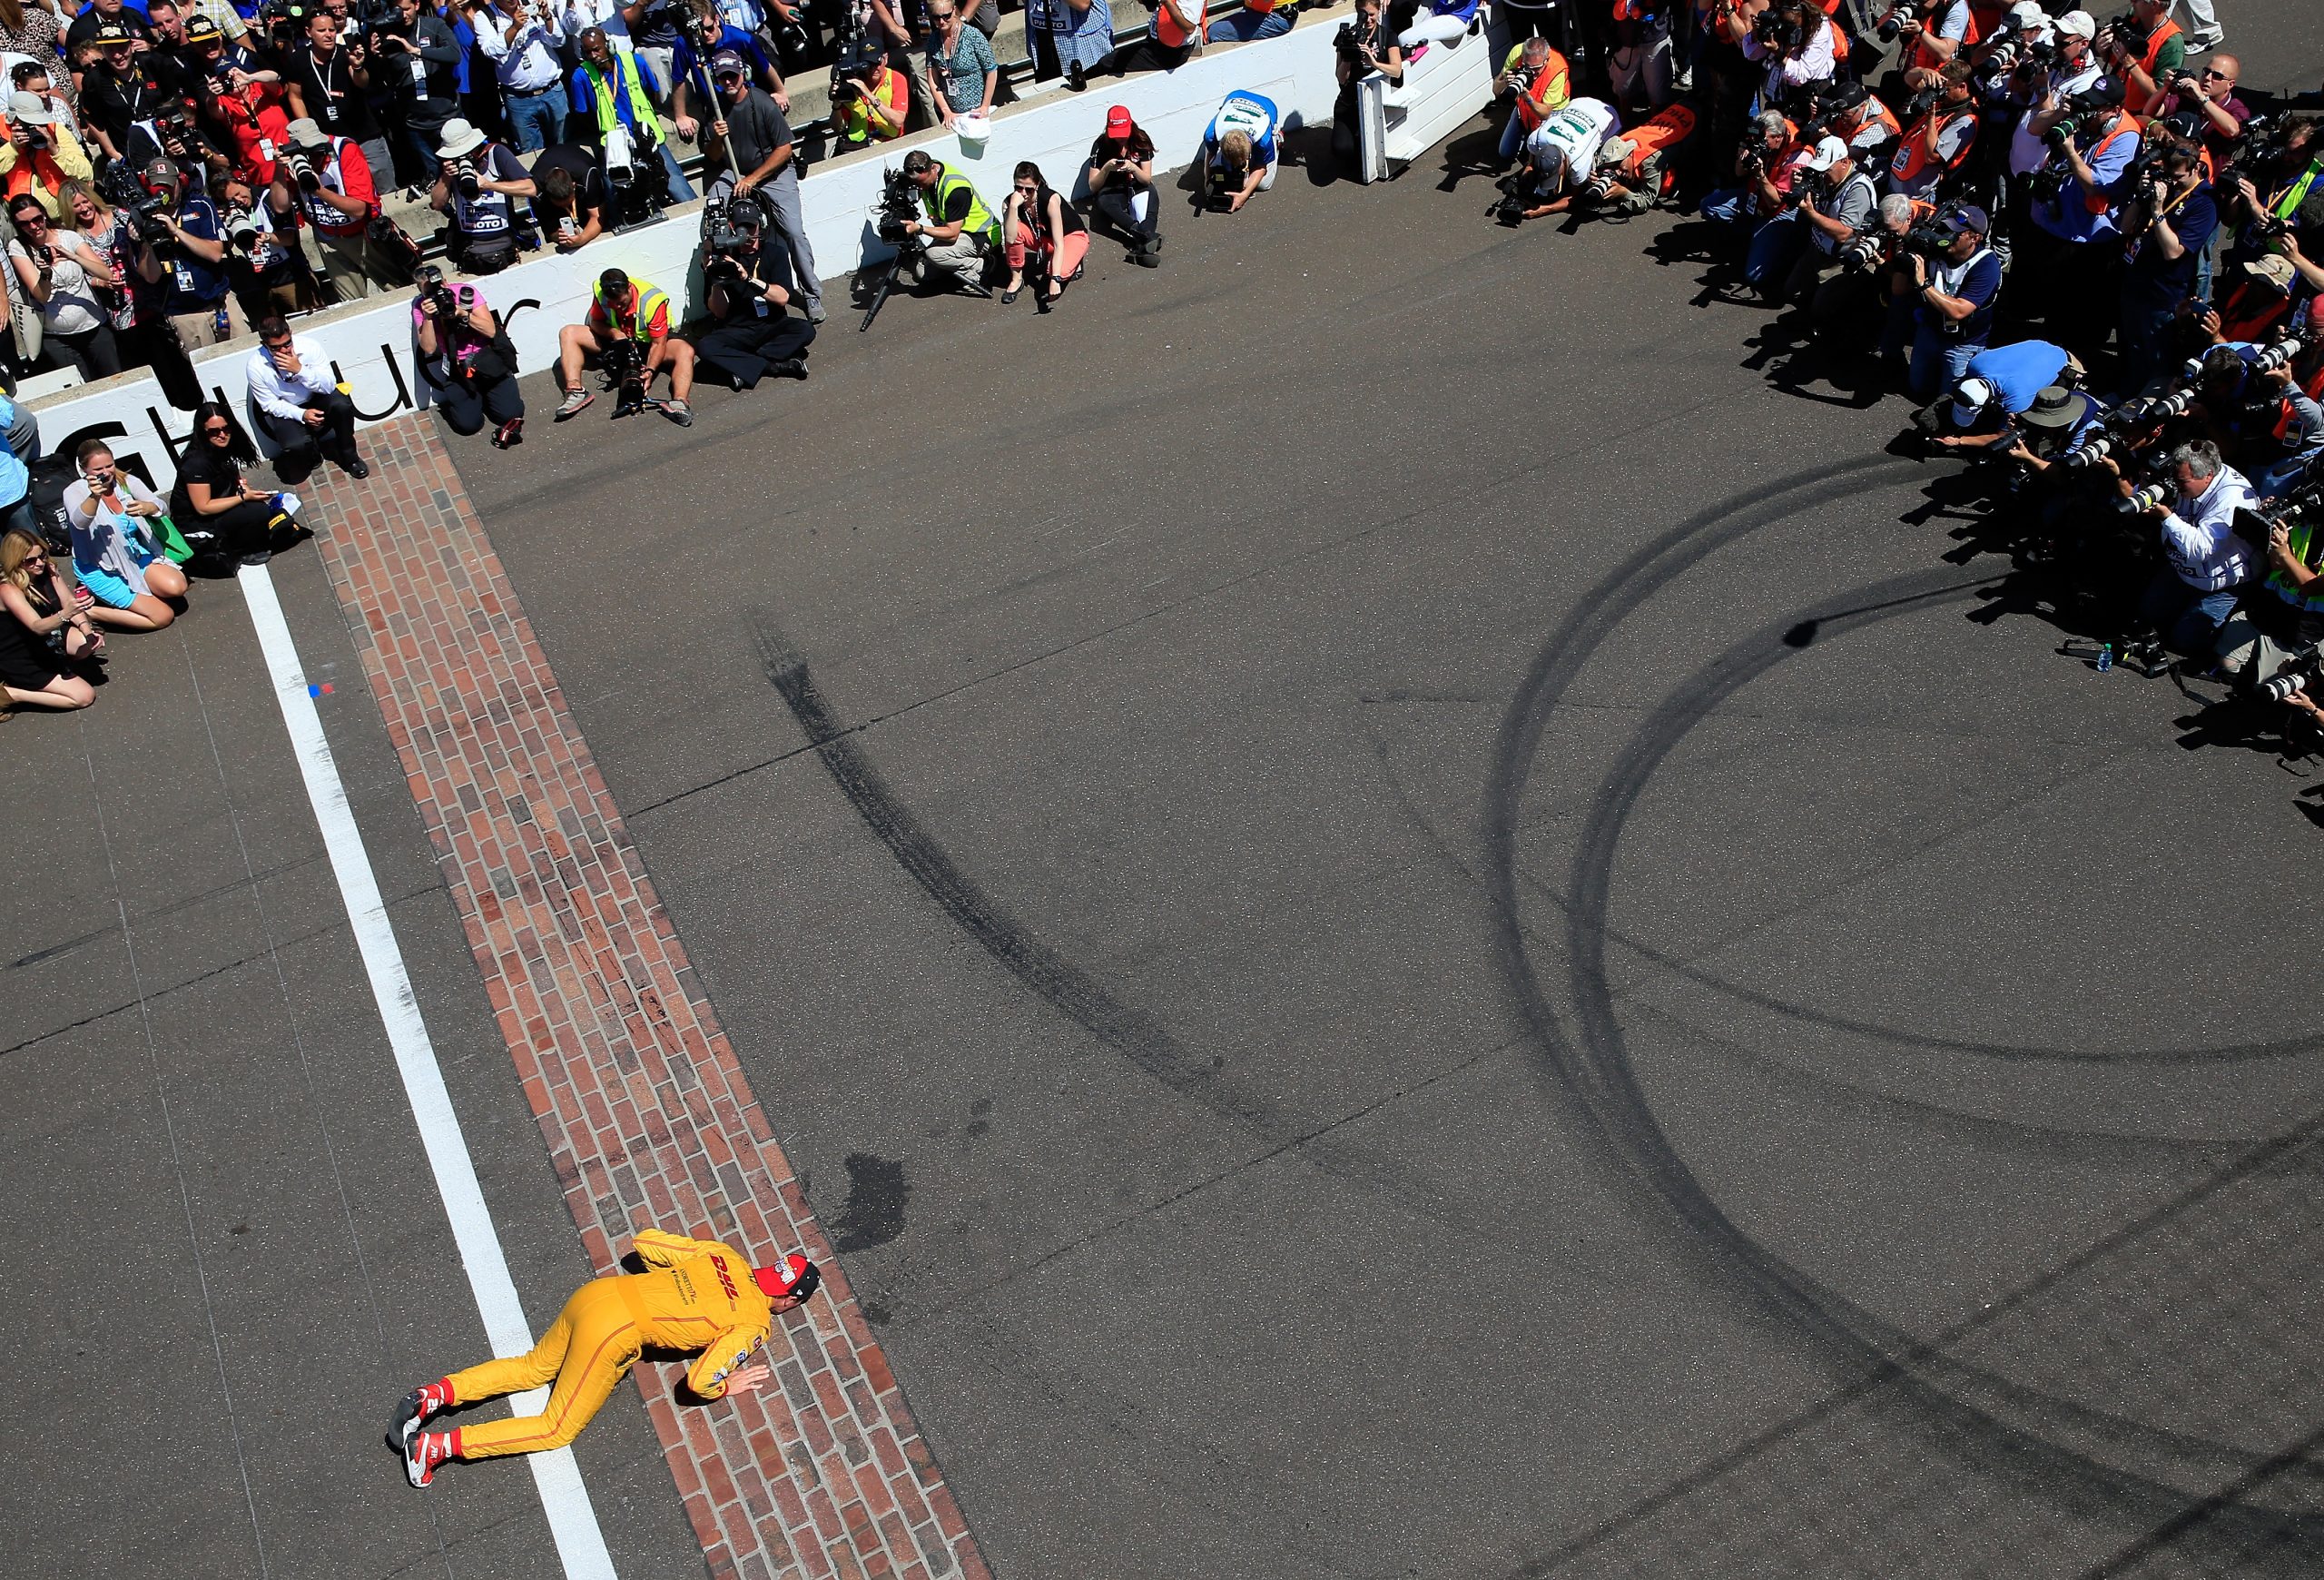 Ryan Hunter-Reay kisses the bricks after winning the 2014 Indianapolis 500.